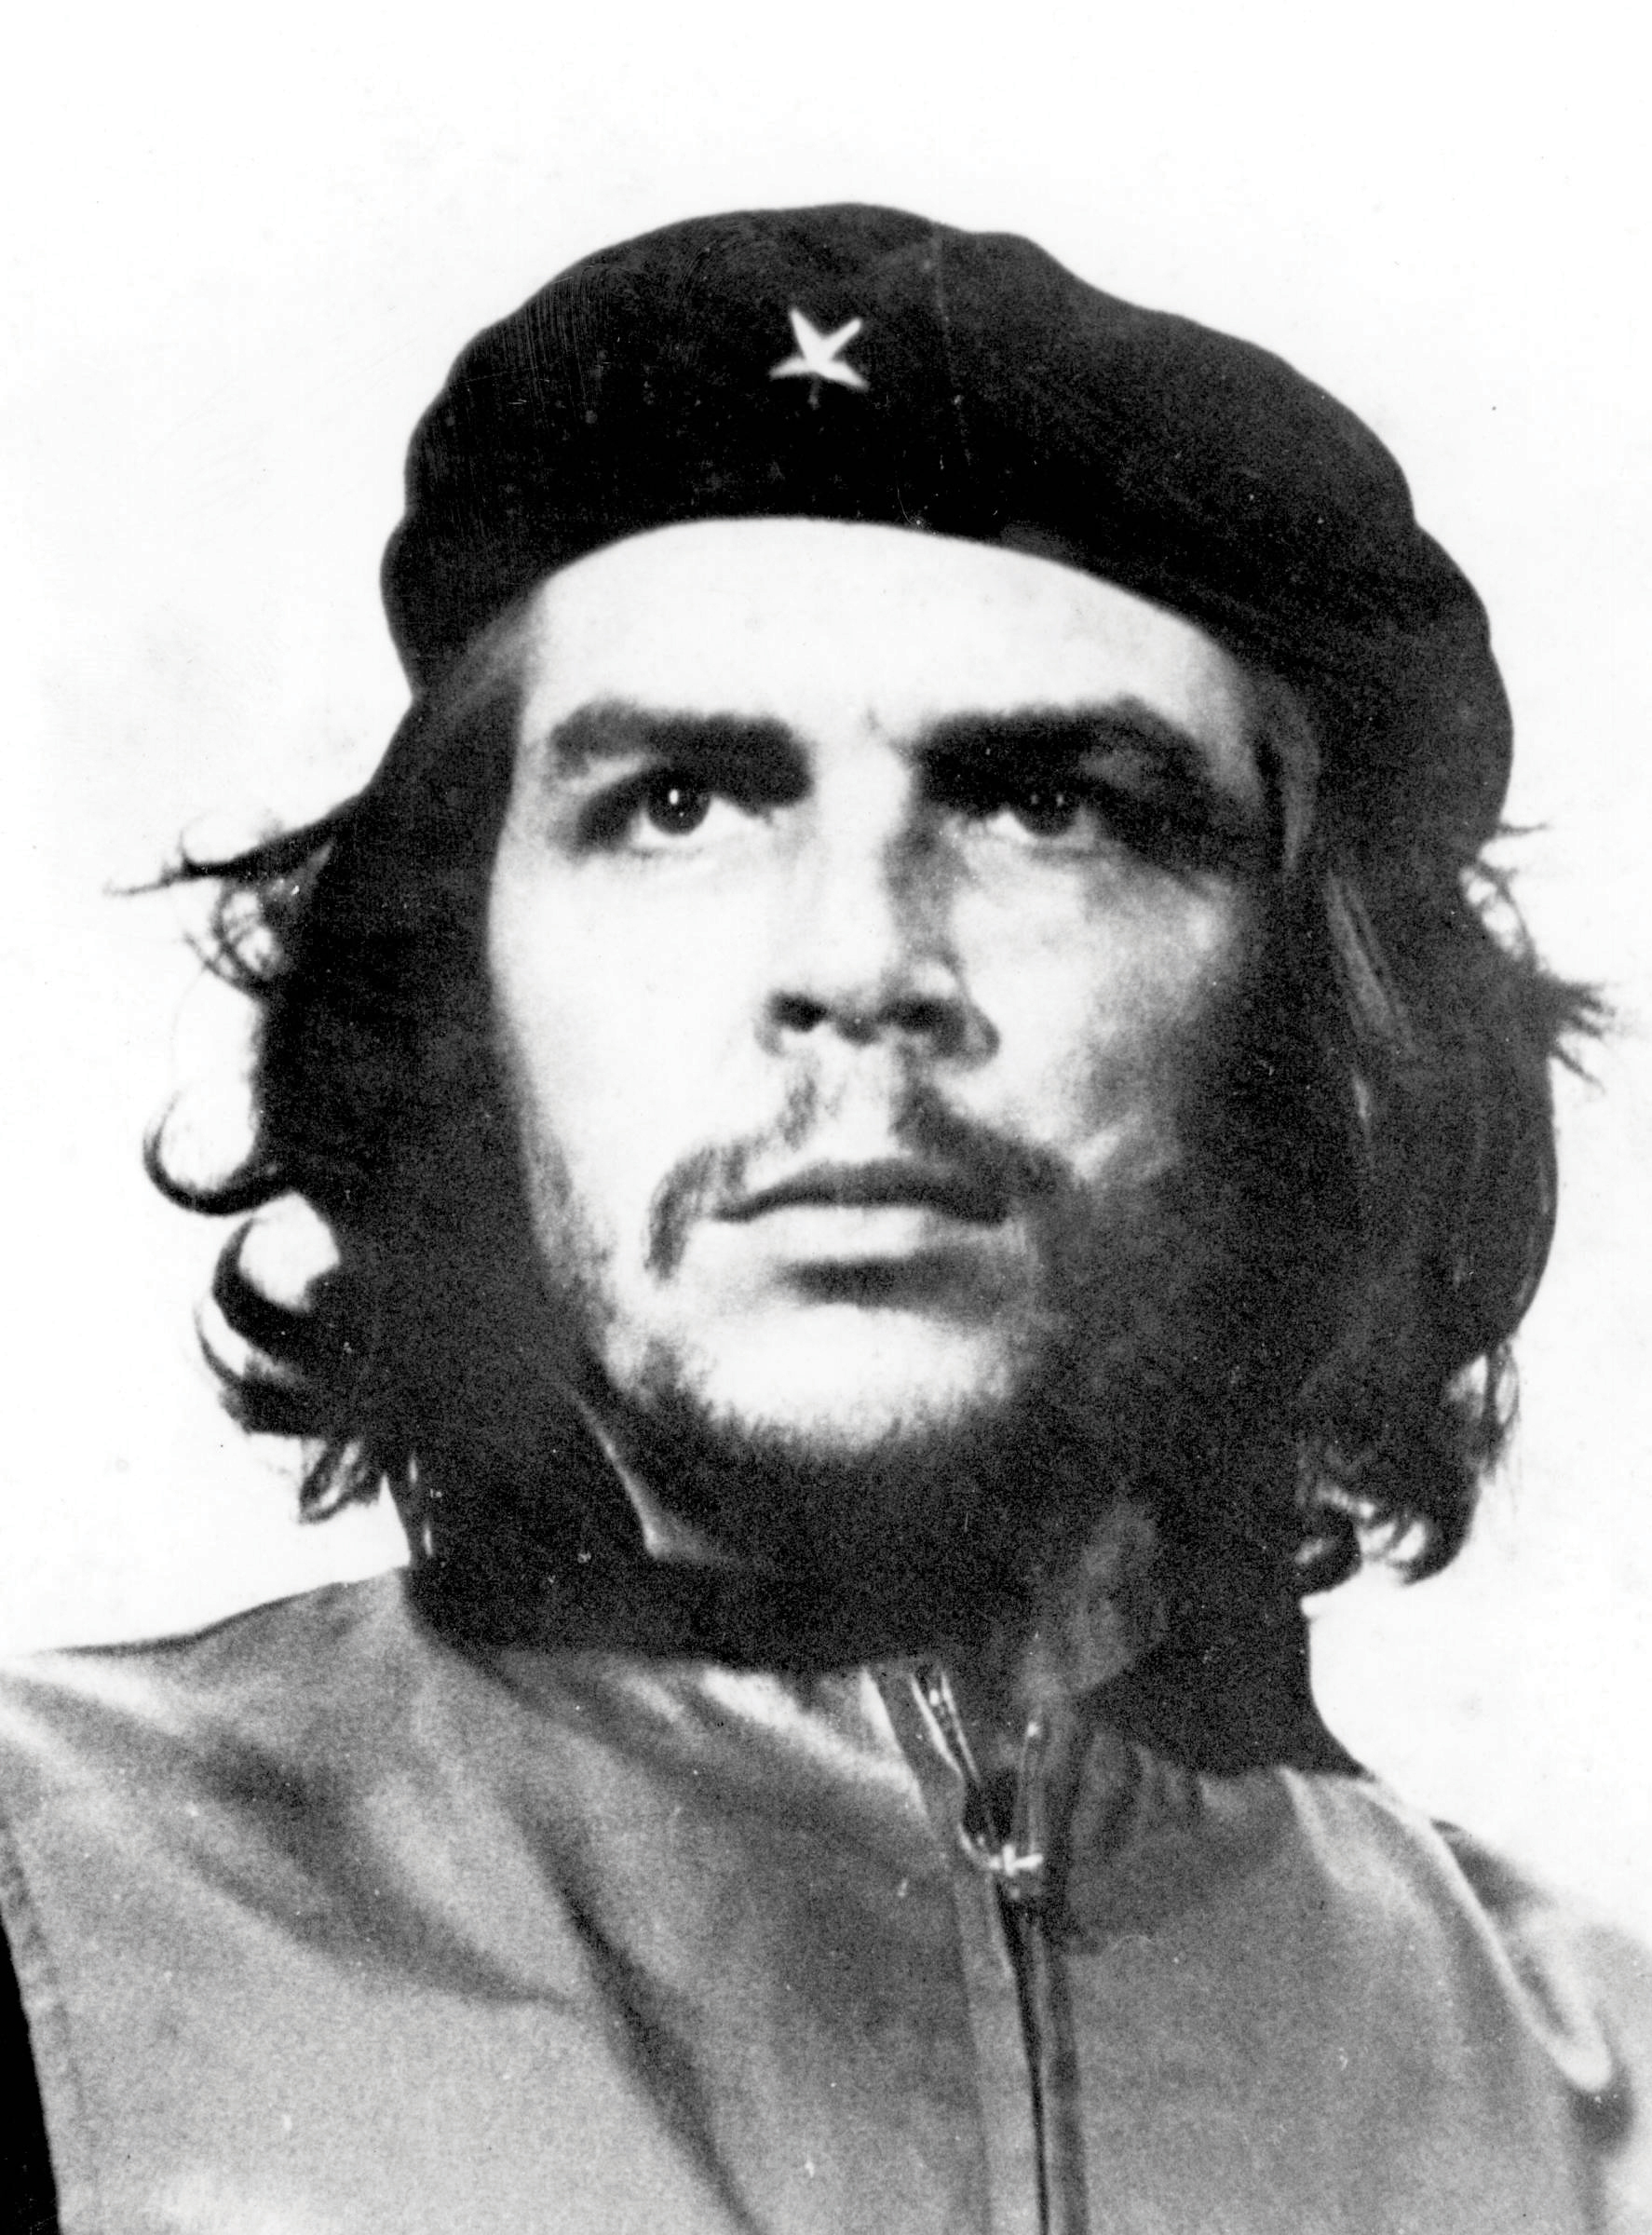 Che Guevara, revolutionary: "I know you've come to kill me. Shoot, you are only going to kill a man."